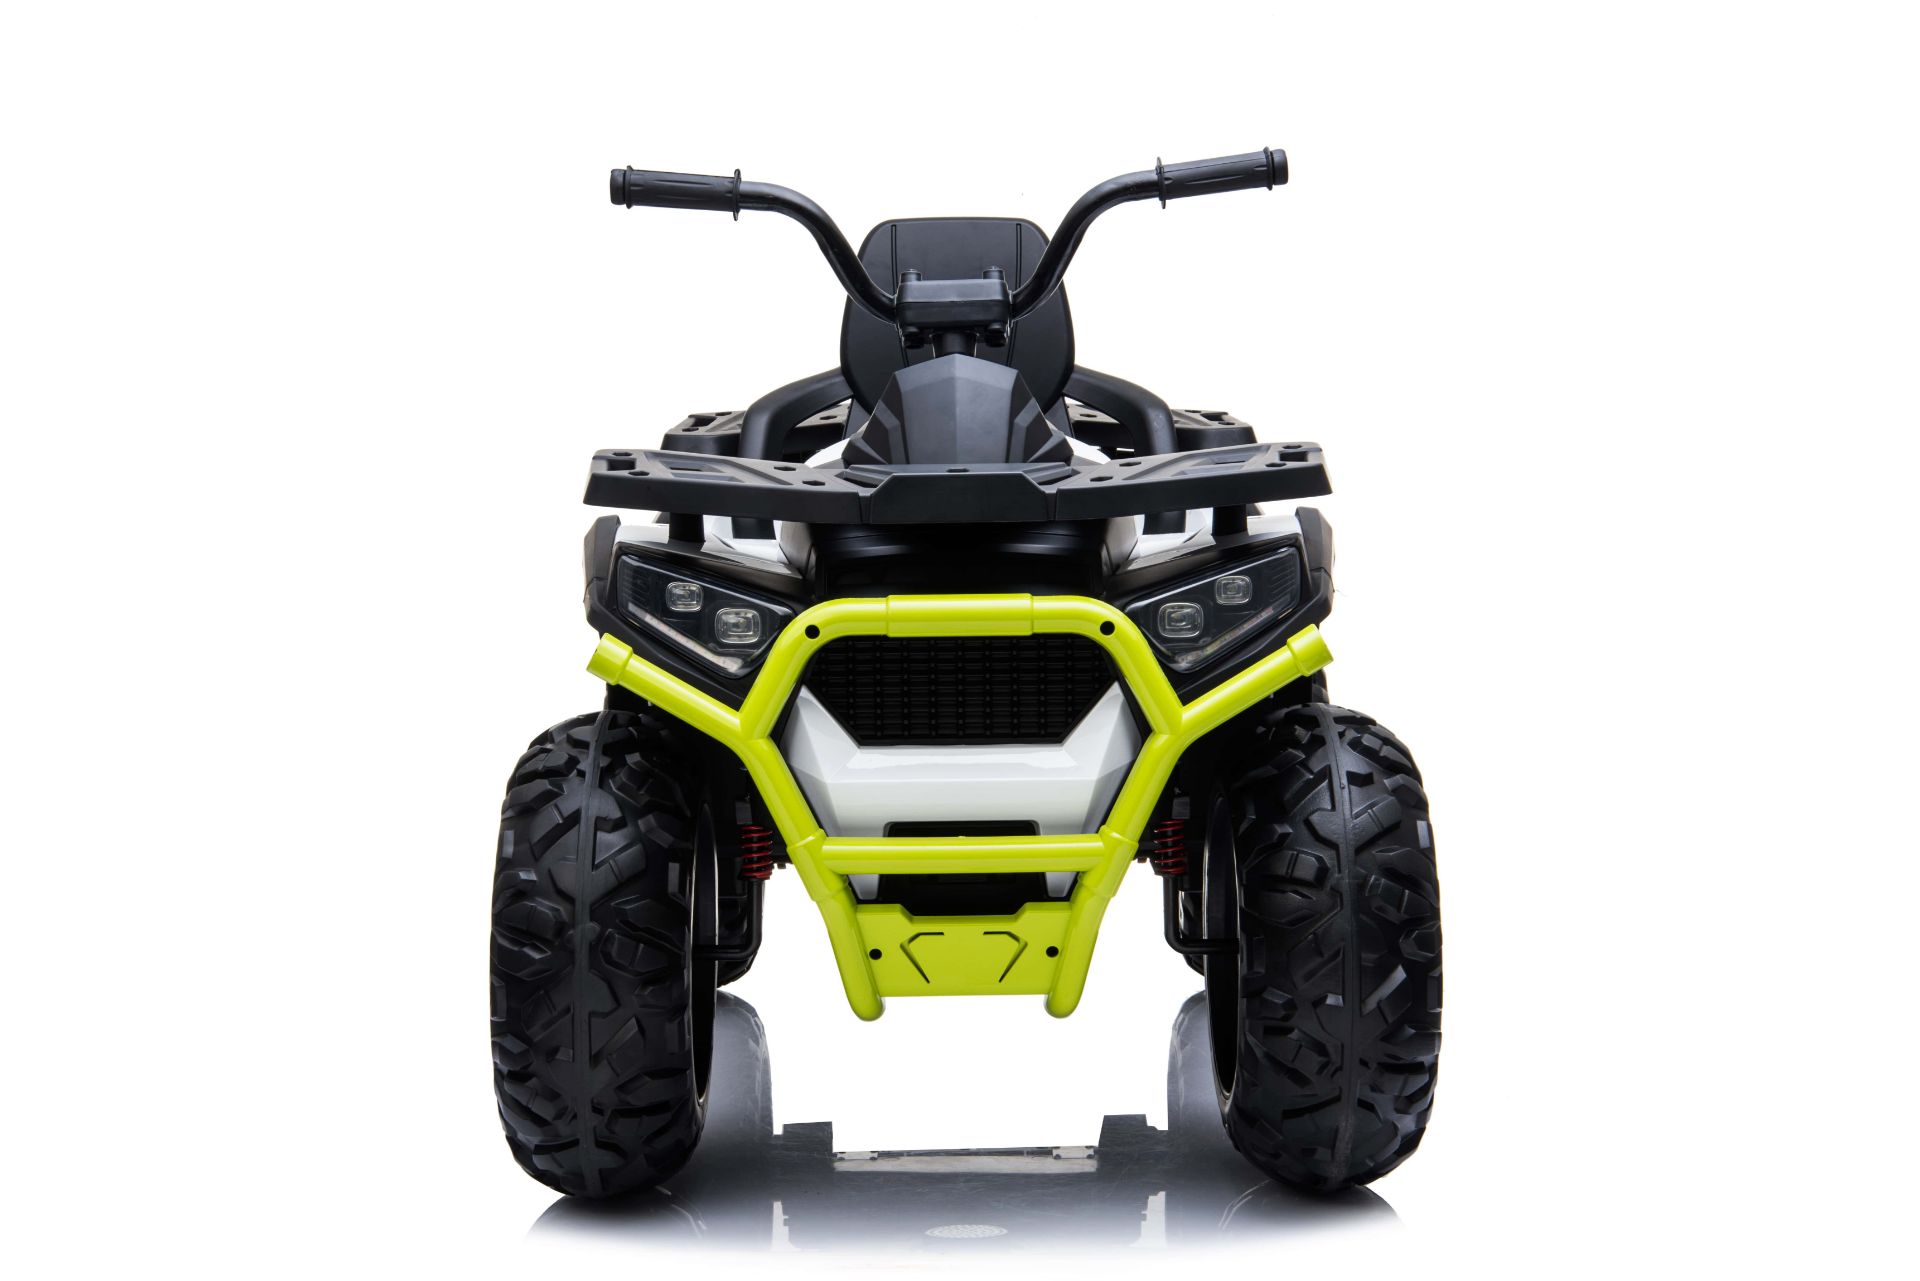 Brand New Ride On Childs Quad Bike 12v with Parental Remote Control - White - Image 2 of 10